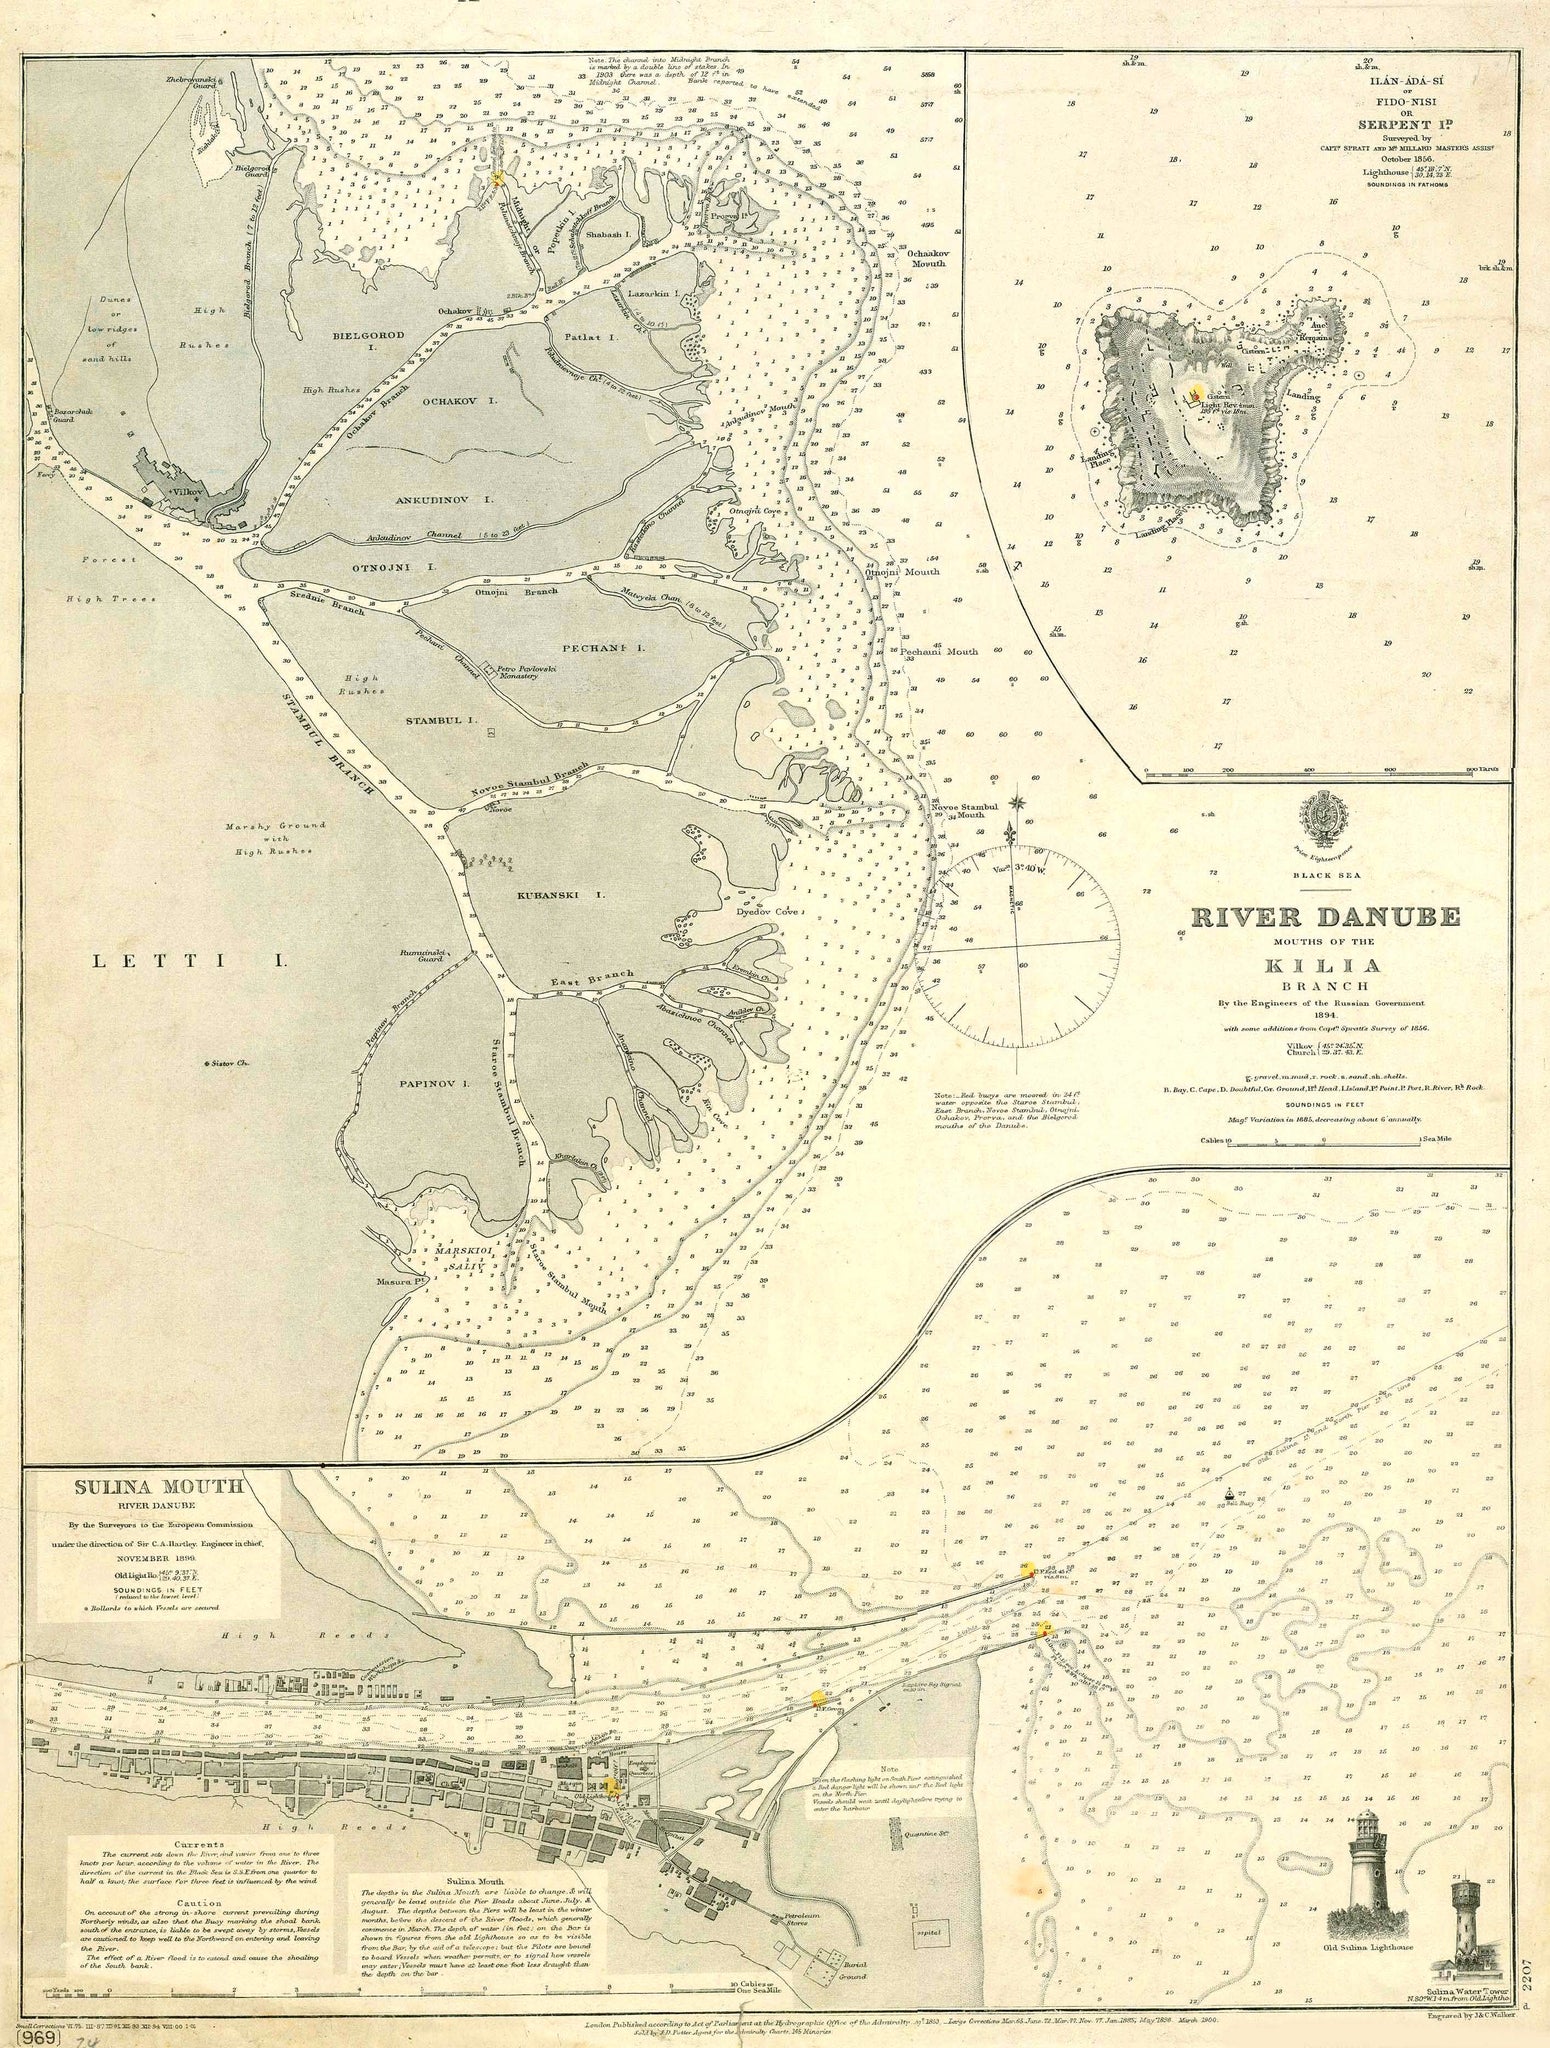 Romania, "Black Sea - River Danube Mouth of the Kilia Branch. By the Engineers of the Russian Government 1894"  Lithograph by J. & C. Walker. London  The Romanian part of the Danube delta near Sulima. With a city plan of Sulima and with an inset of "Serpent Island"  London Hydrographic Office of the Admirality, 1853. This map based on the survey by  Captain Spratt and was amended in 1885 and in 1898.  This print was published in 1900.